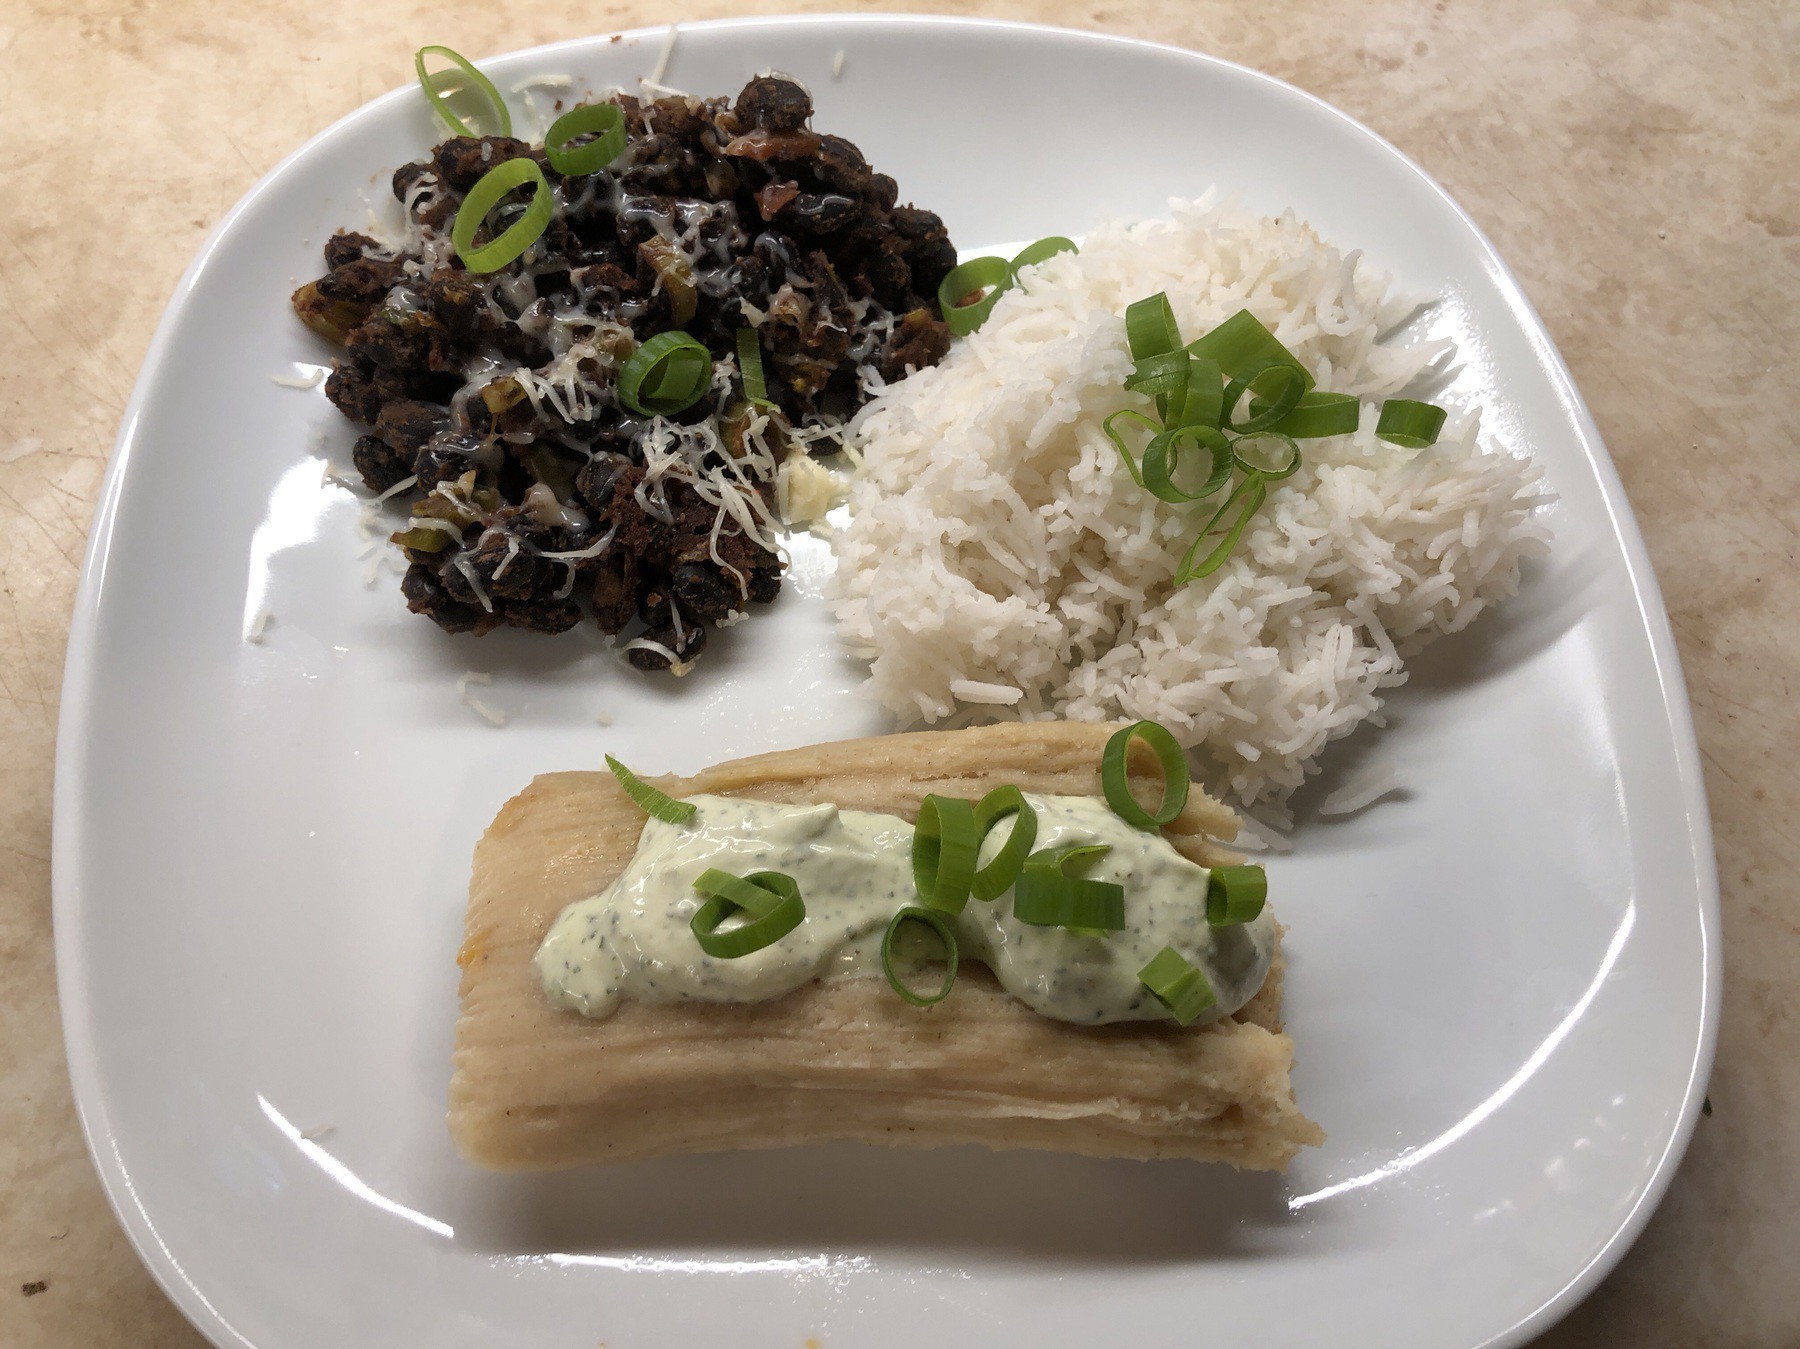 Empanada,black beans, and rice on plate.